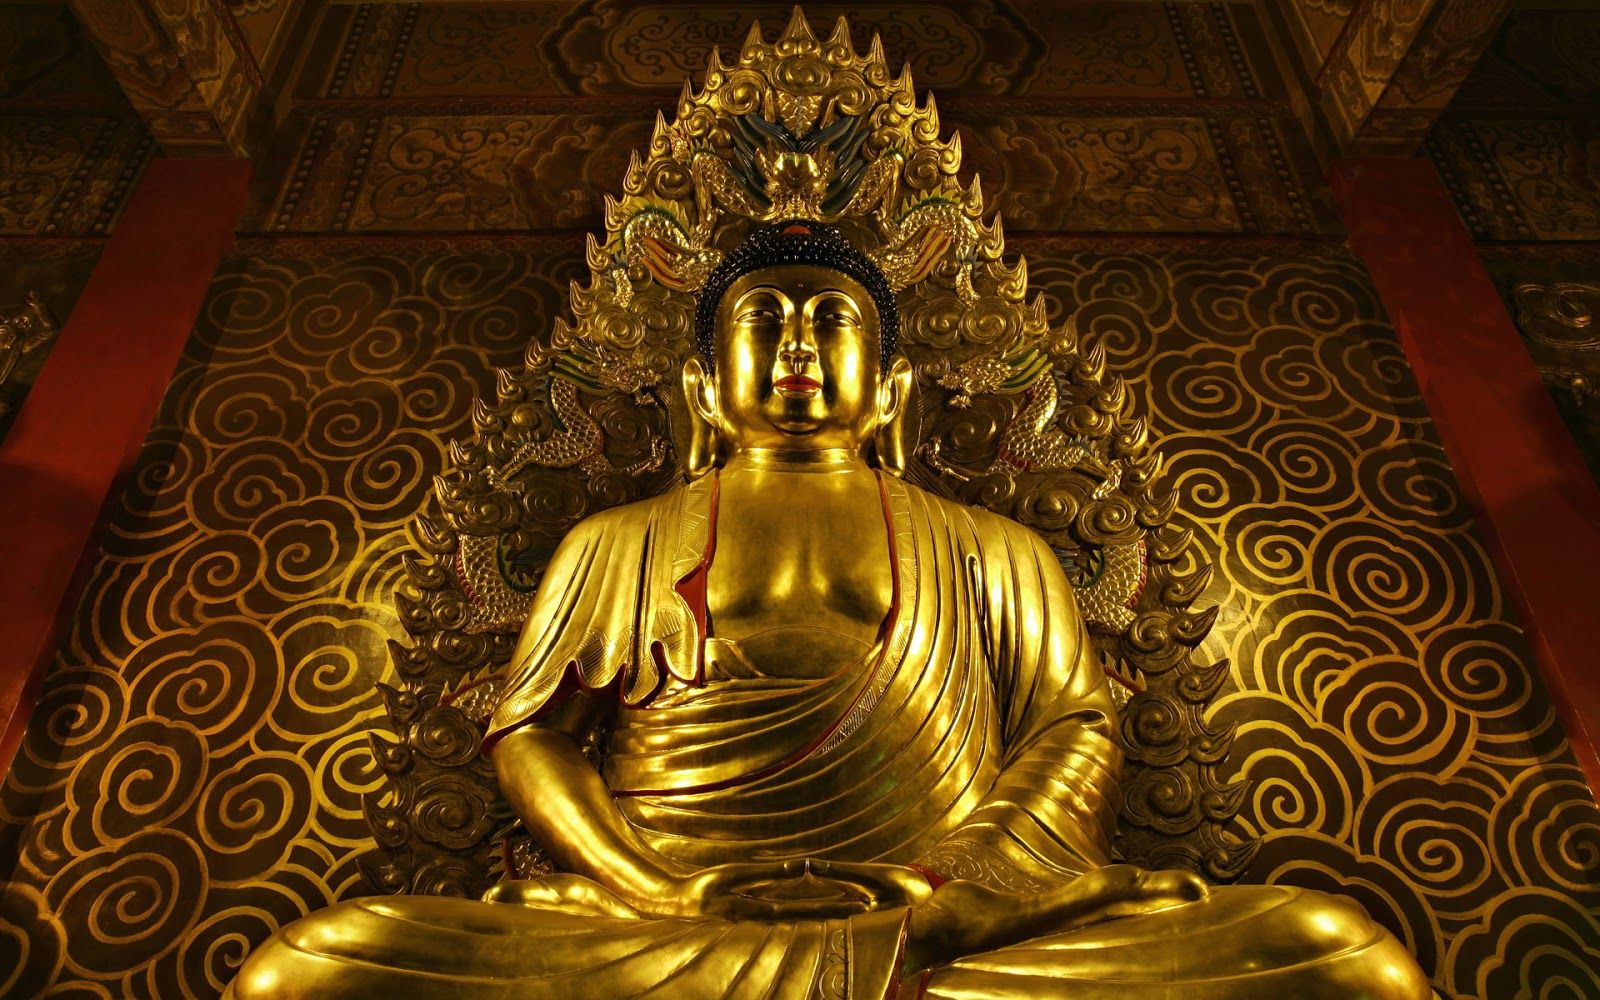 Free download buddha HD wallpaper image for lord buddha HD wallpaper lord buddha [1600x1000] for your Desktop, Mobile & Tablet. Explore Buddhist Background